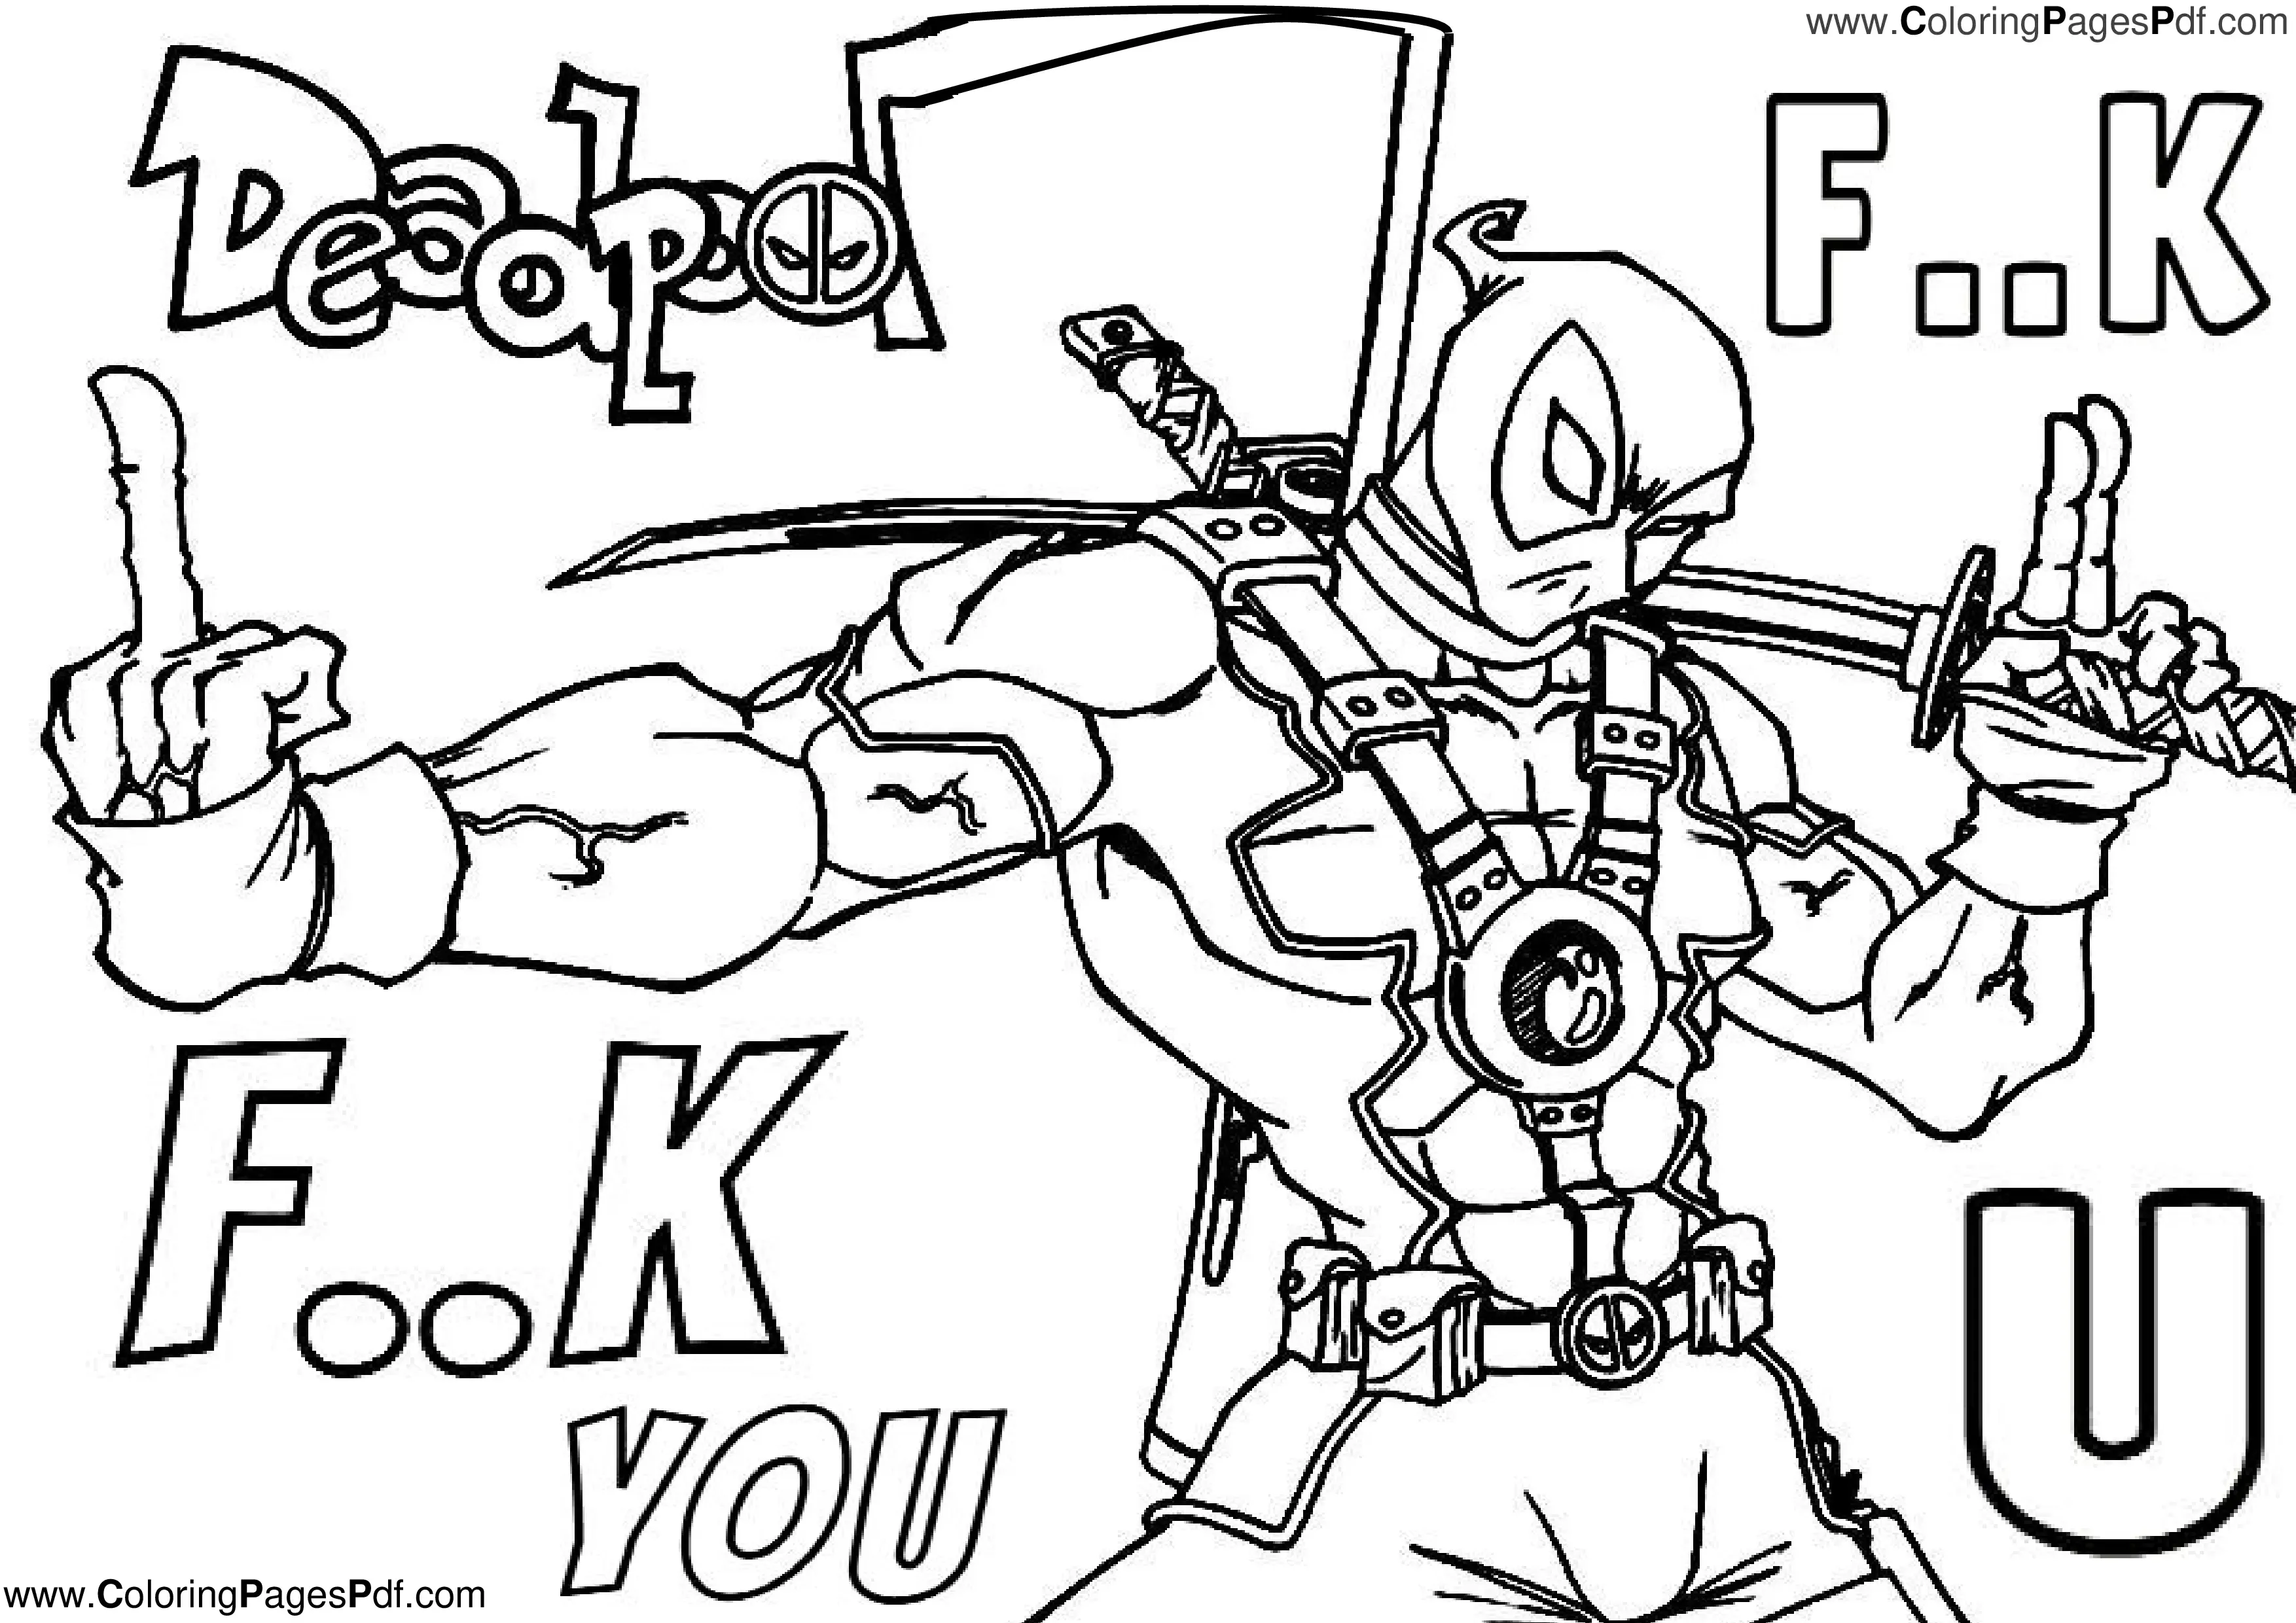 Deadpool coloring pages for adults